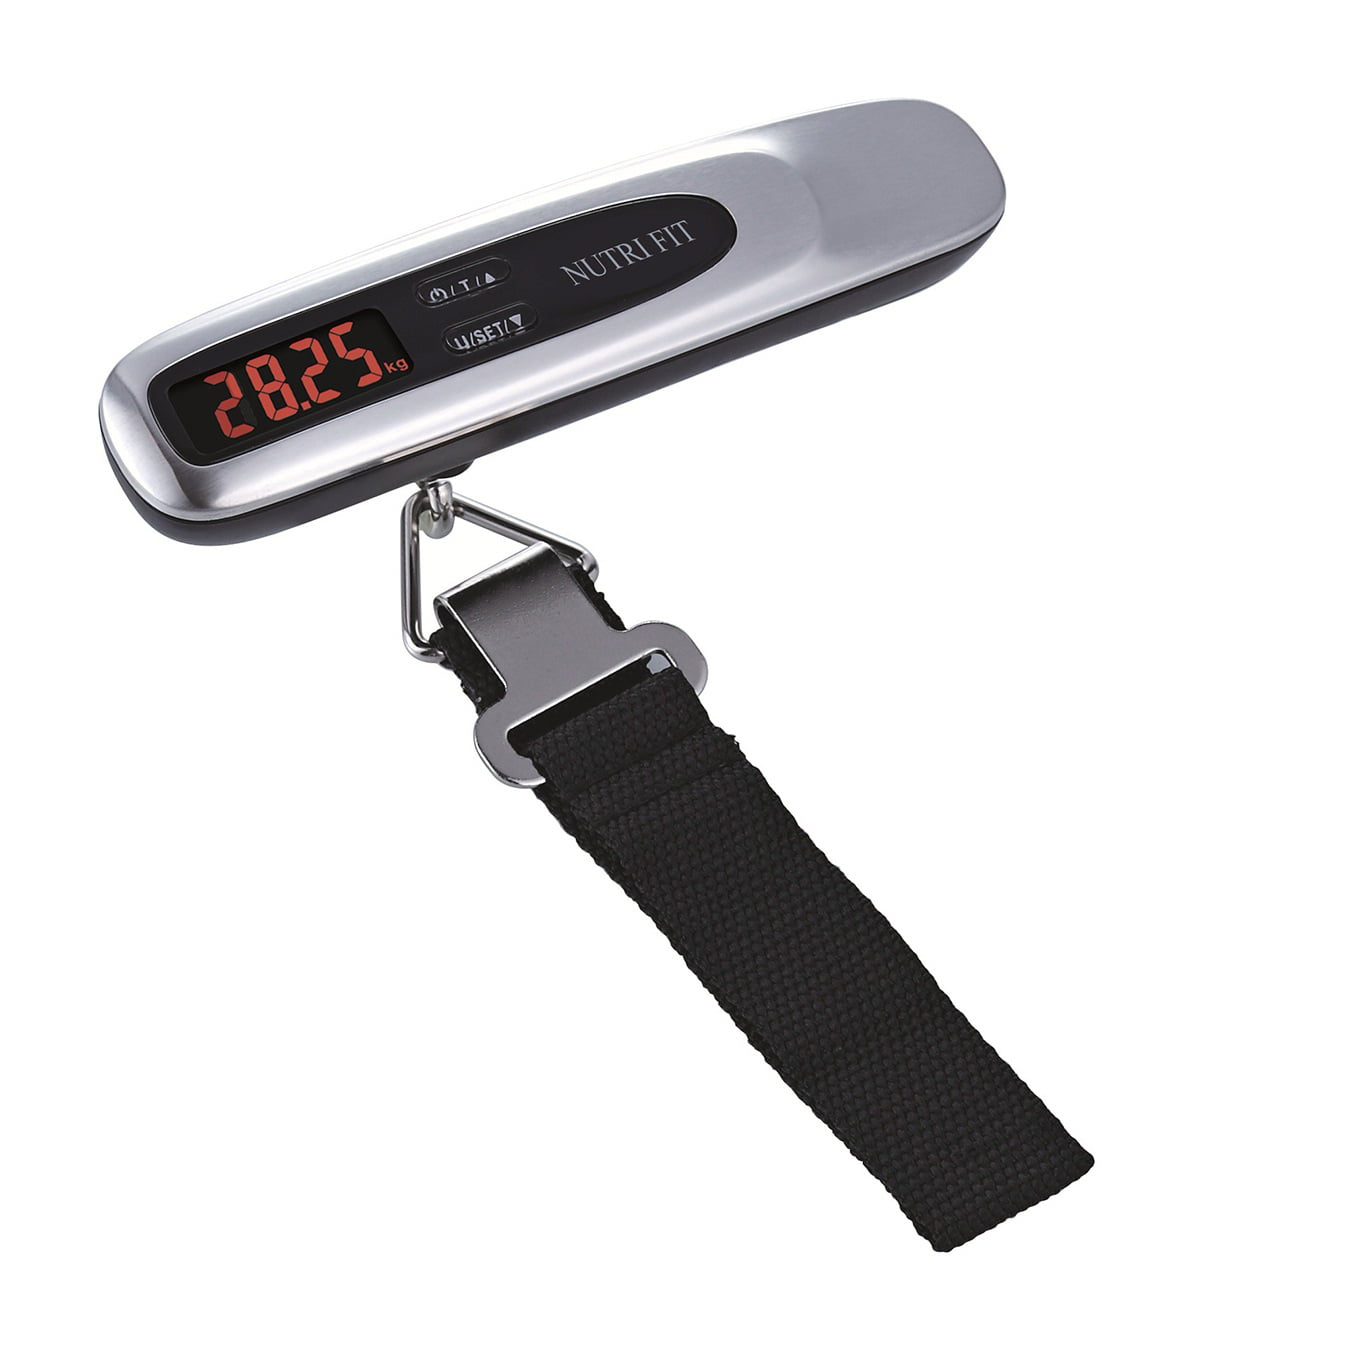 Tools 25Kg x 5g Digital Hanging Scale Mini Electronic Luggage Hook Scale LCD Backlight Kitchen Steelyard censhaorme 